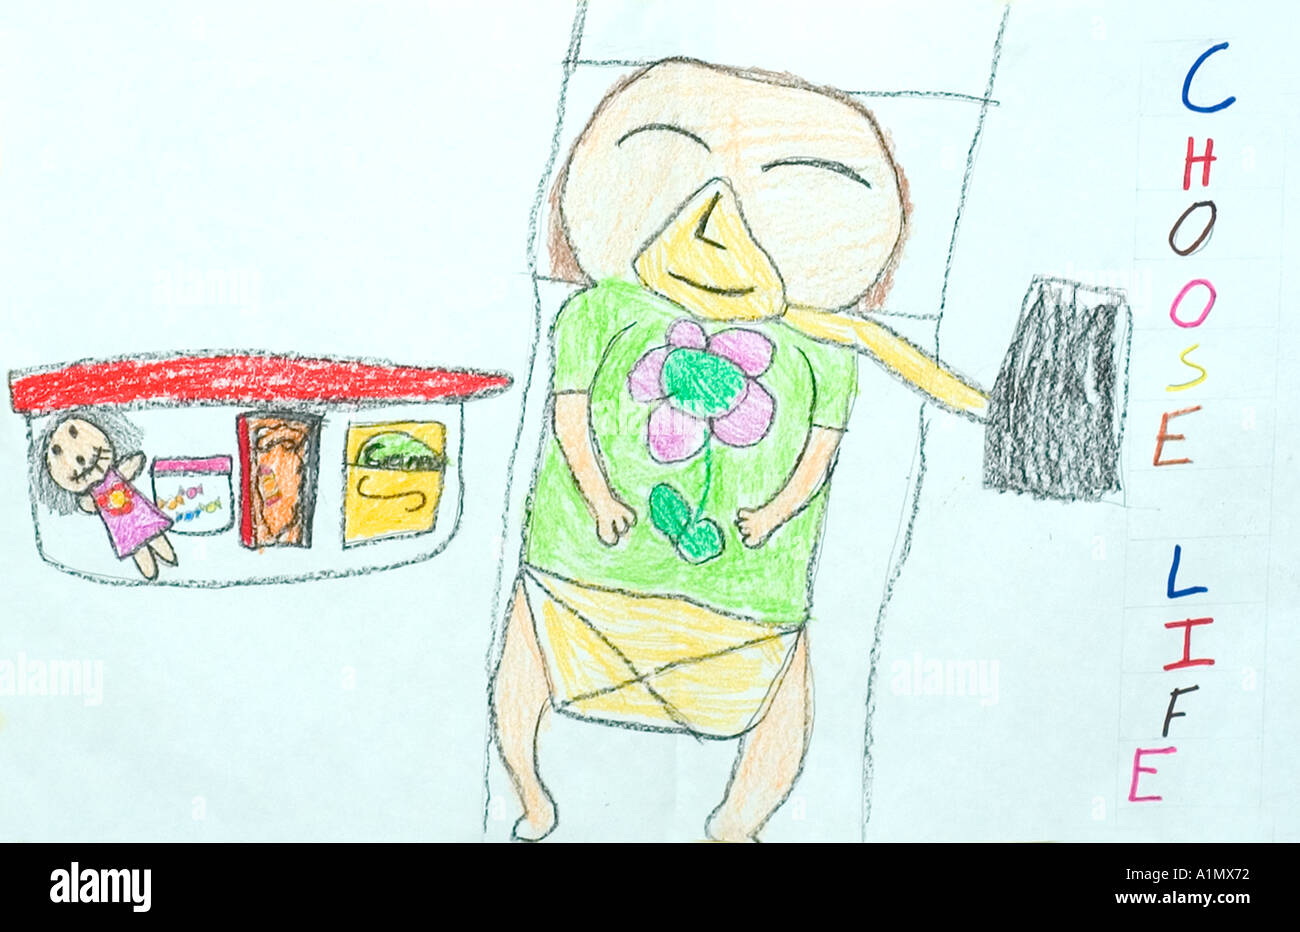 anti abortion drawing done by a grade school child as part of a Catholic school project Stock Photo